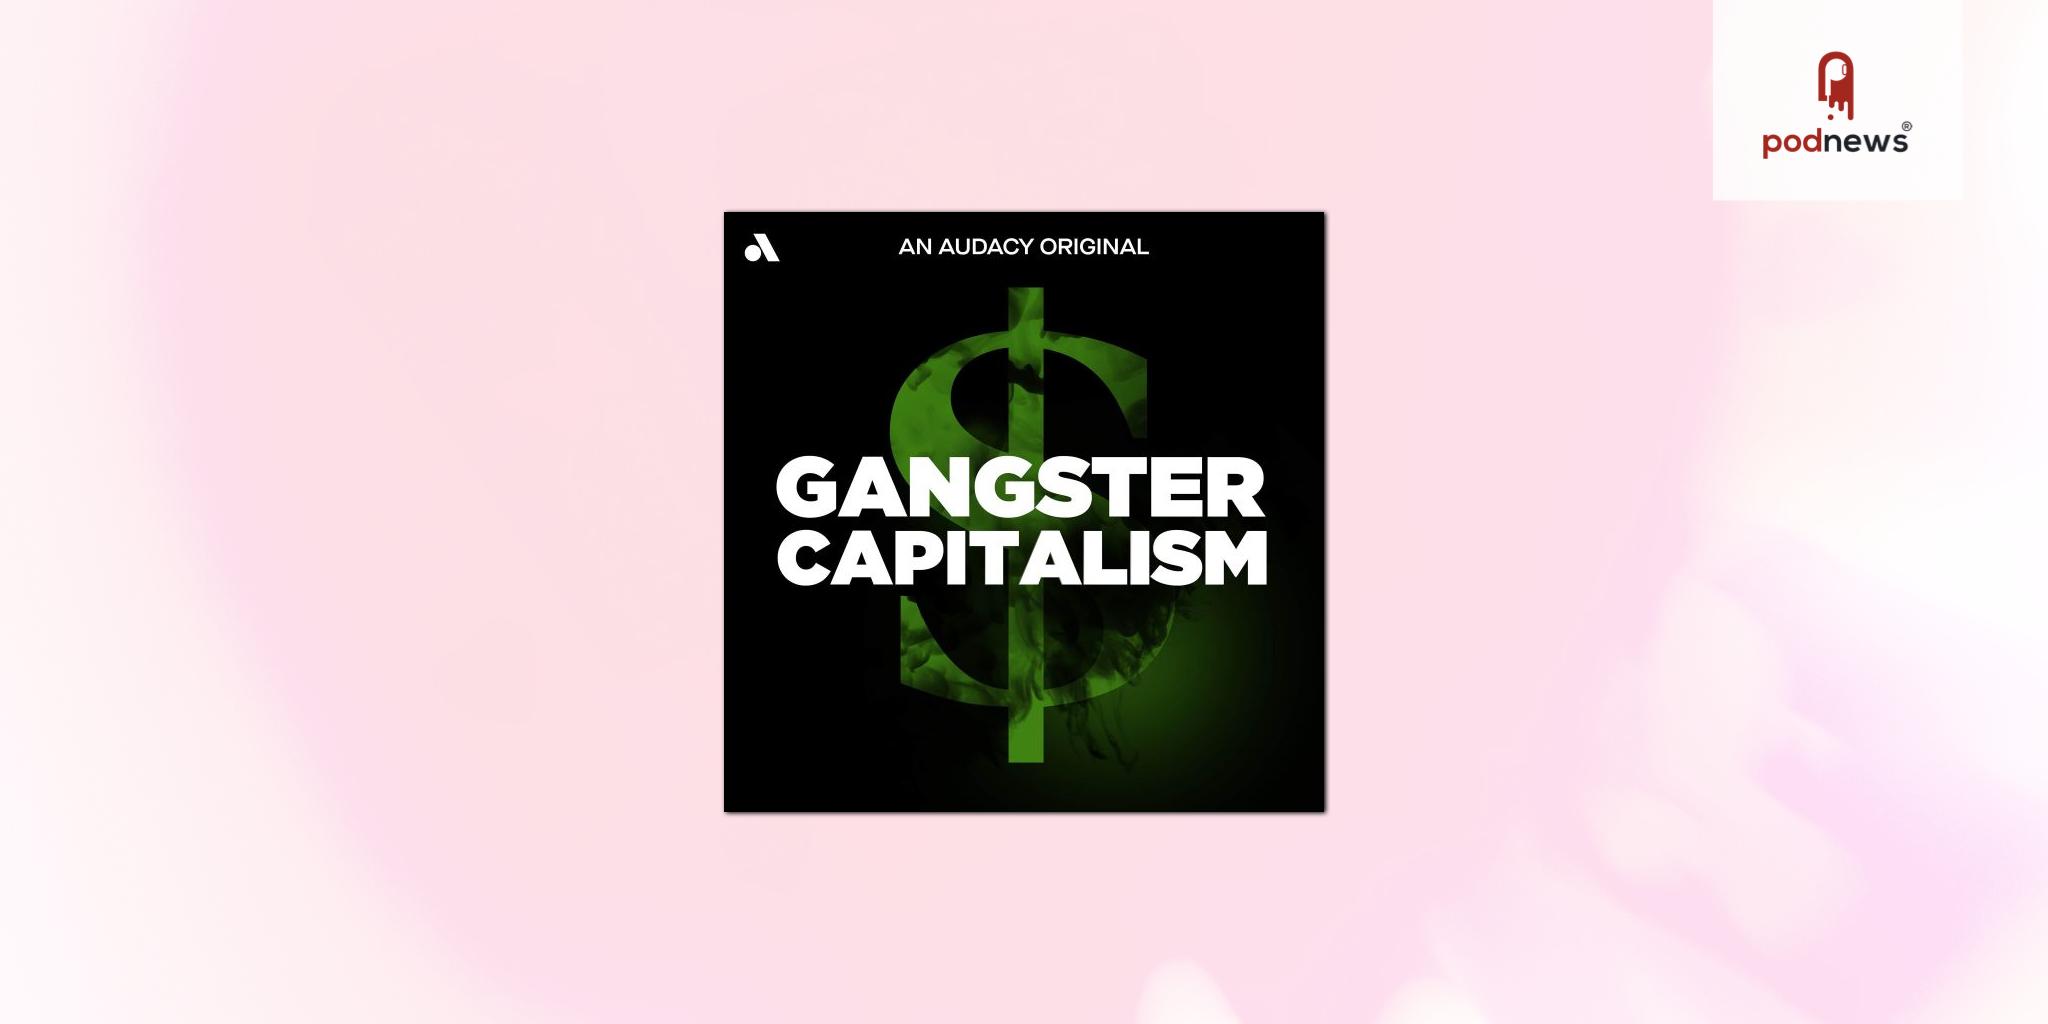 C13Originals Expands Audio Documentary Slate with New Season of Peabody Award-Nominated Gangster Capitalism